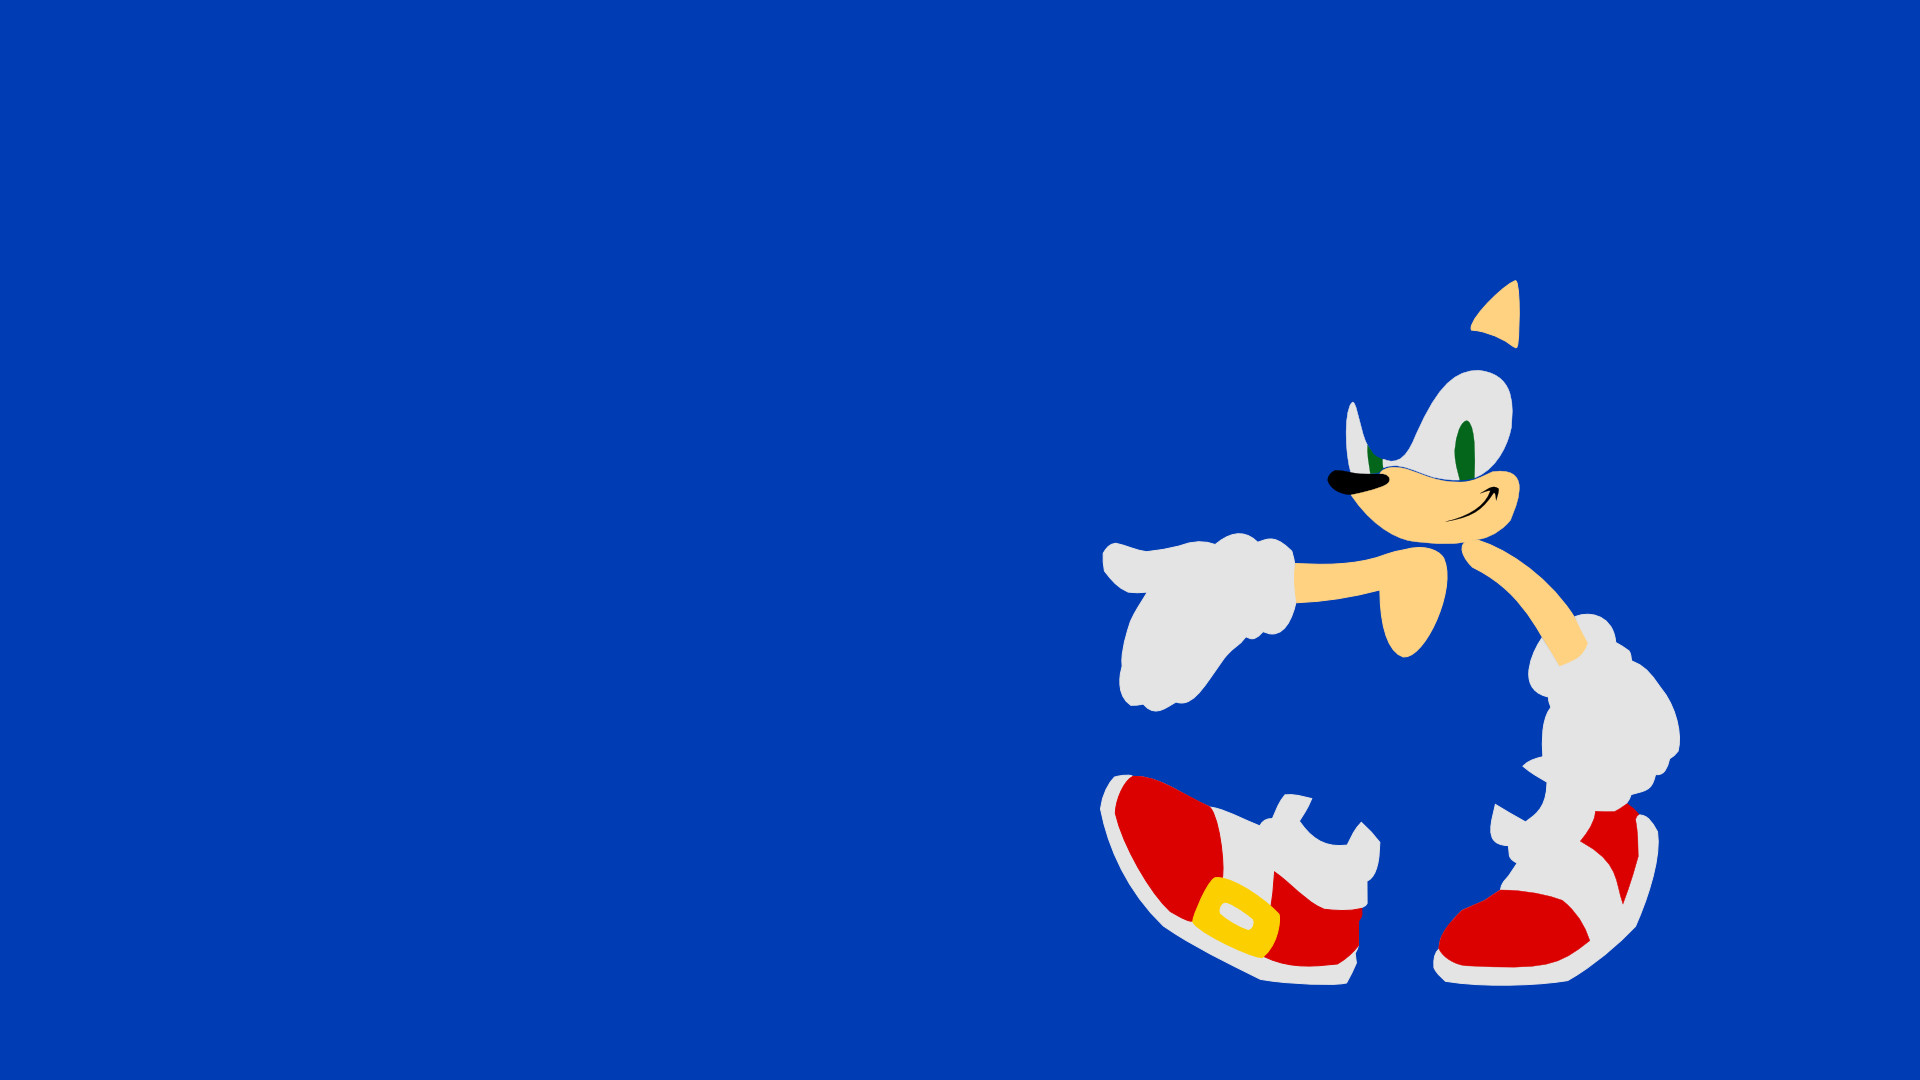 1920x1080 Sonic the Hedgehog HD Wallpaper | Background Image |  | ID:438246  - Wallpaper Abyss